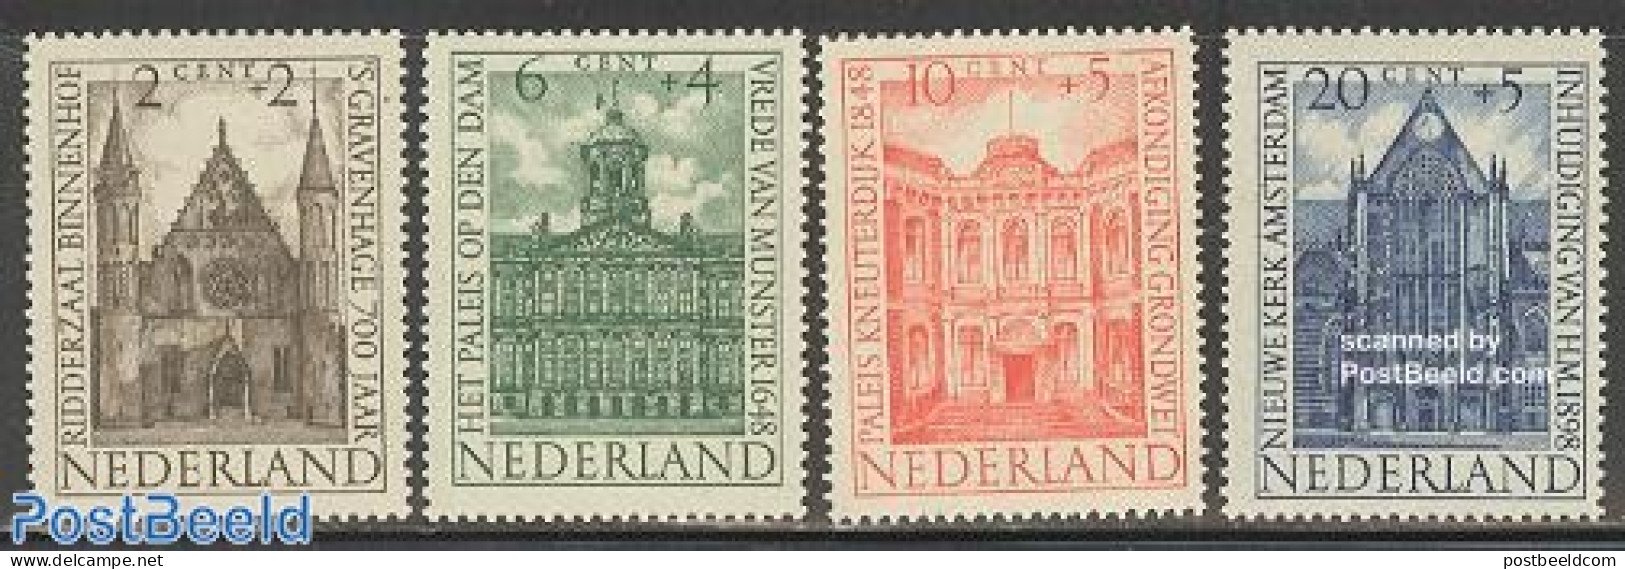 Netherlands 1948 Architectural Heritage 4v, Mint NH, Religion - Churches, Temples, Mosques, Synagogues - Art - Archite.. - Ungebraucht